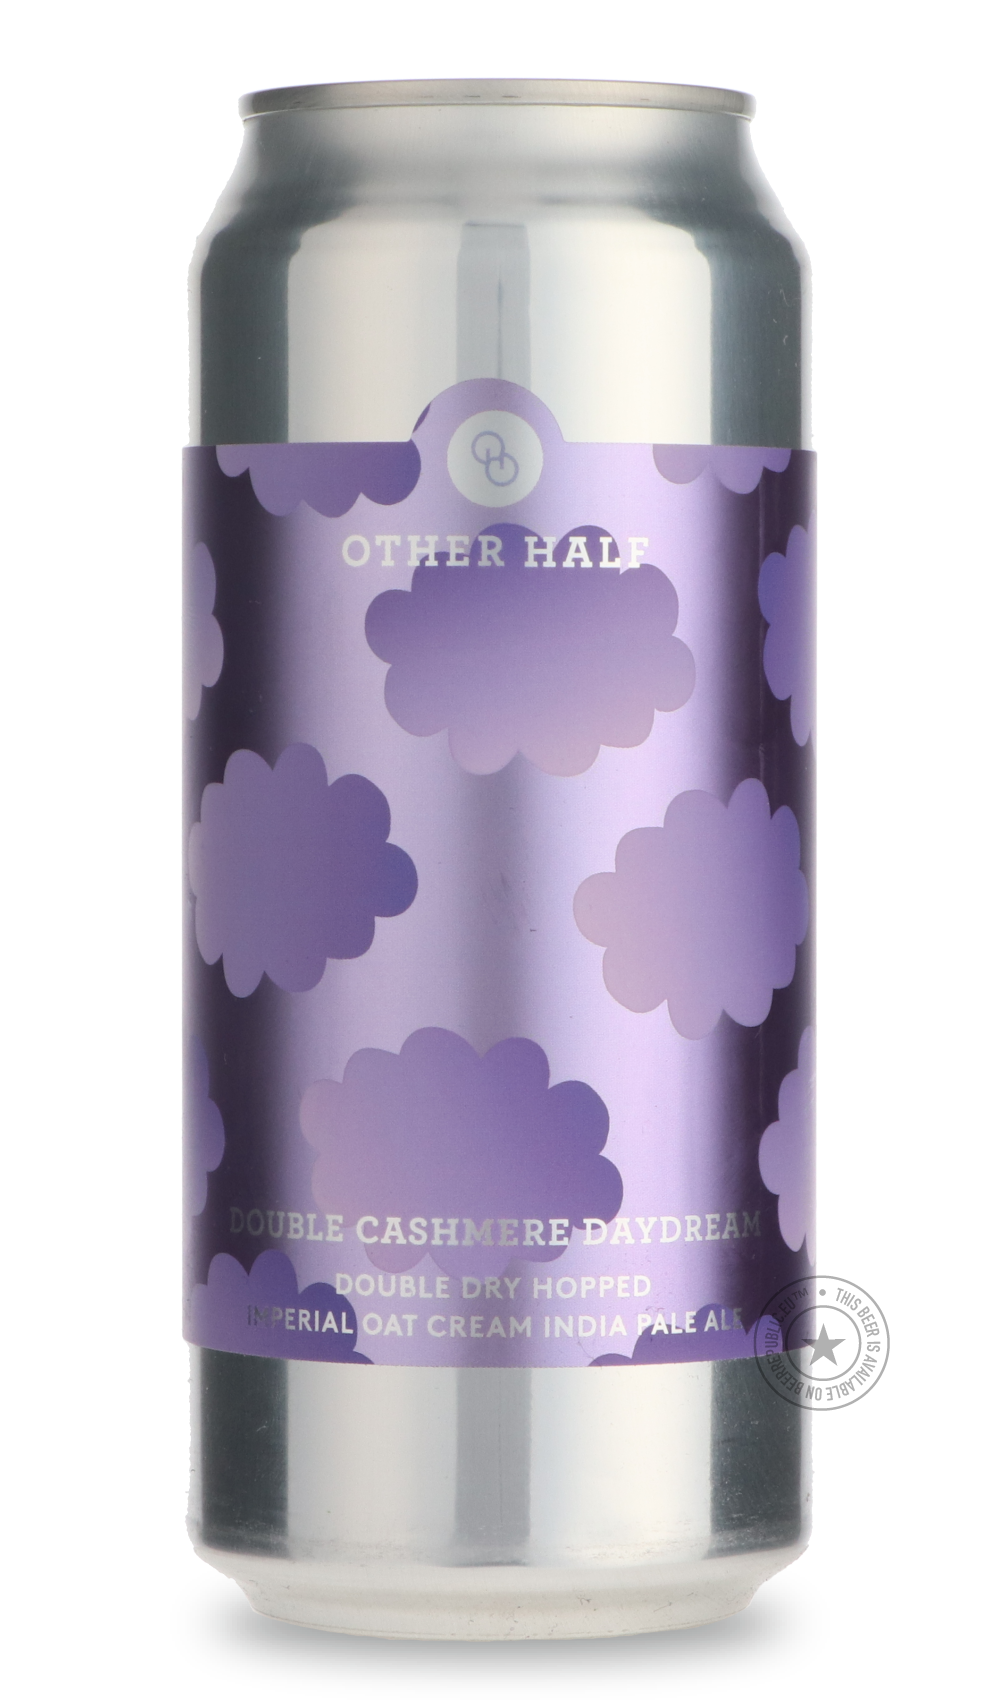 -Other Half- Double Cashmere Daydream-IPA- Only @ Beer Republic - The best online beer store for American & Canadian craft beer - Buy beer online from the USA and Canada - Bier online kopen - Amerikaans bier kopen - Craft beer store - Craft beer kopen - Amerikanisch bier kaufen - Bier online kaufen - Acheter biere online - IPA - Stout - Porter - New England IPA - Hazy IPA - Imperial Stout - Barrel Aged - Barrel Aged Imperial Stout - Brown - Dark beer - Blond - Blonde - Pilsner - Lager - Wheat - Weizen - Amb